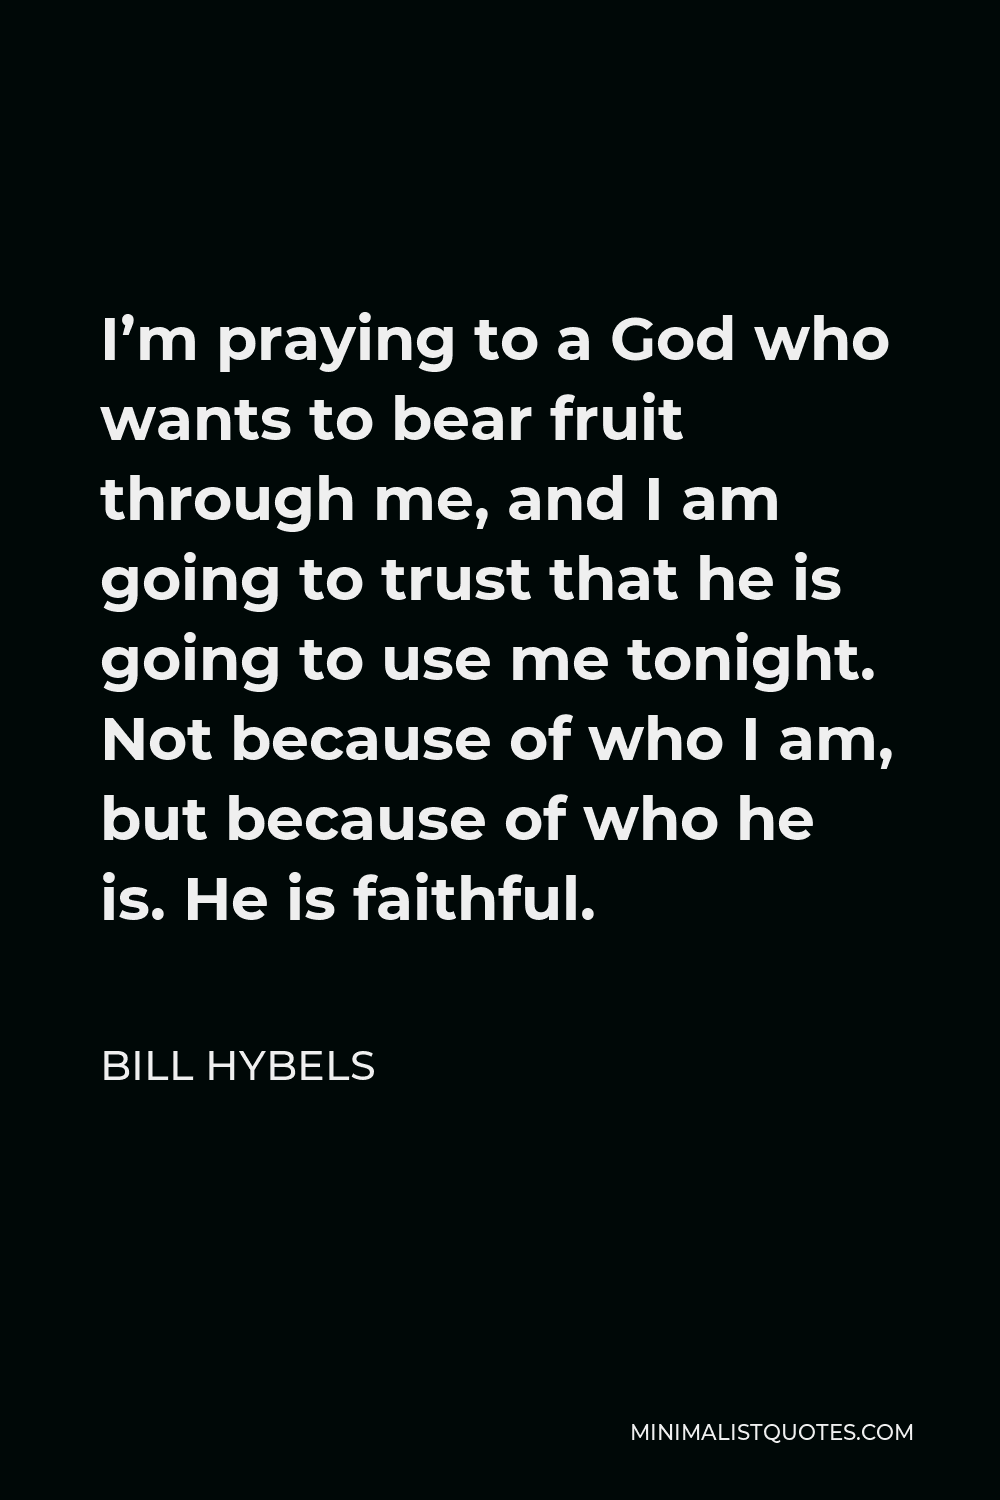 Bill Hybels Quote - I’m praying to a God who wants to bear fruit through me, and I am going to trust that he is going to use me tonight. Not because of who I am, but because of who he is. He is faithful.